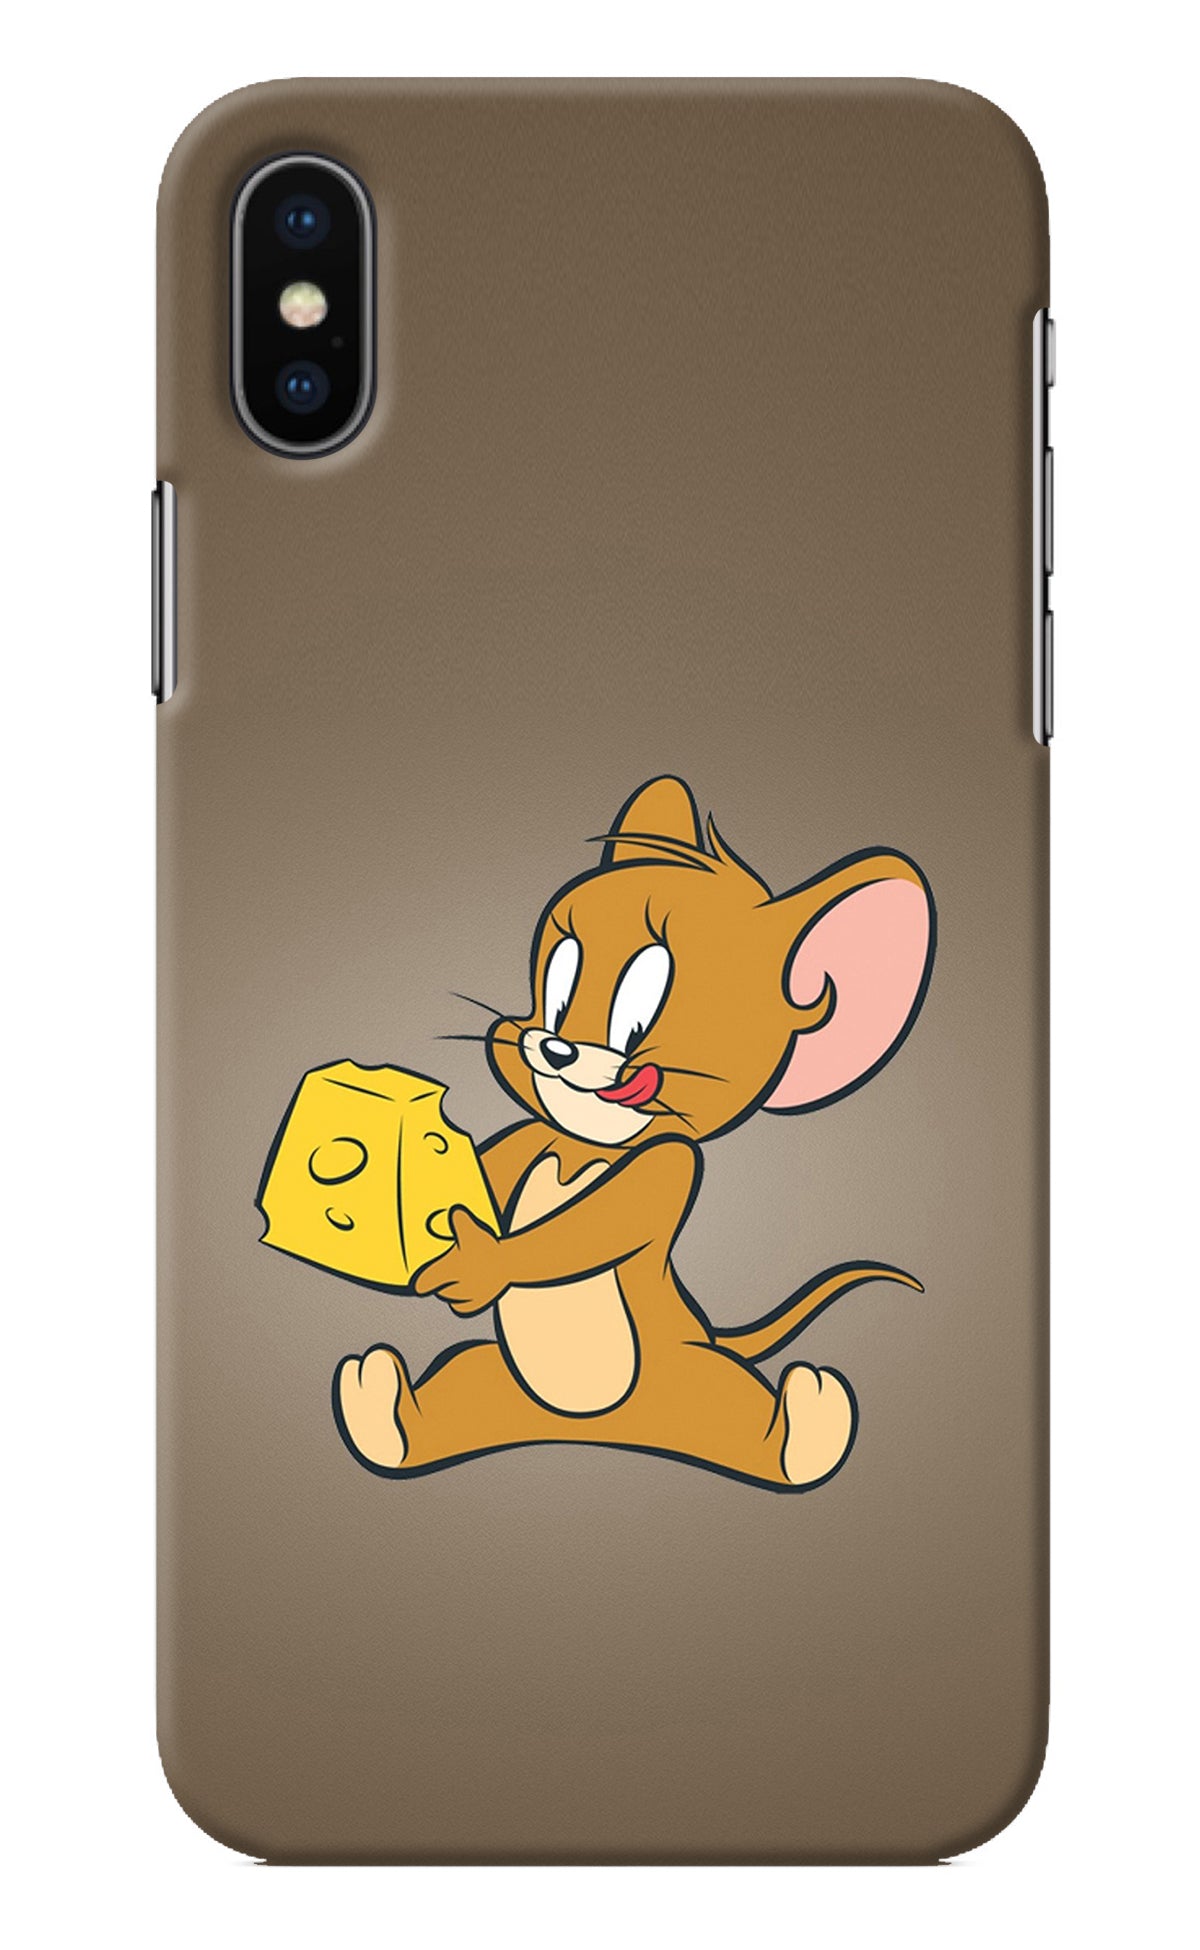 Jerry iPhone XS Back Cover